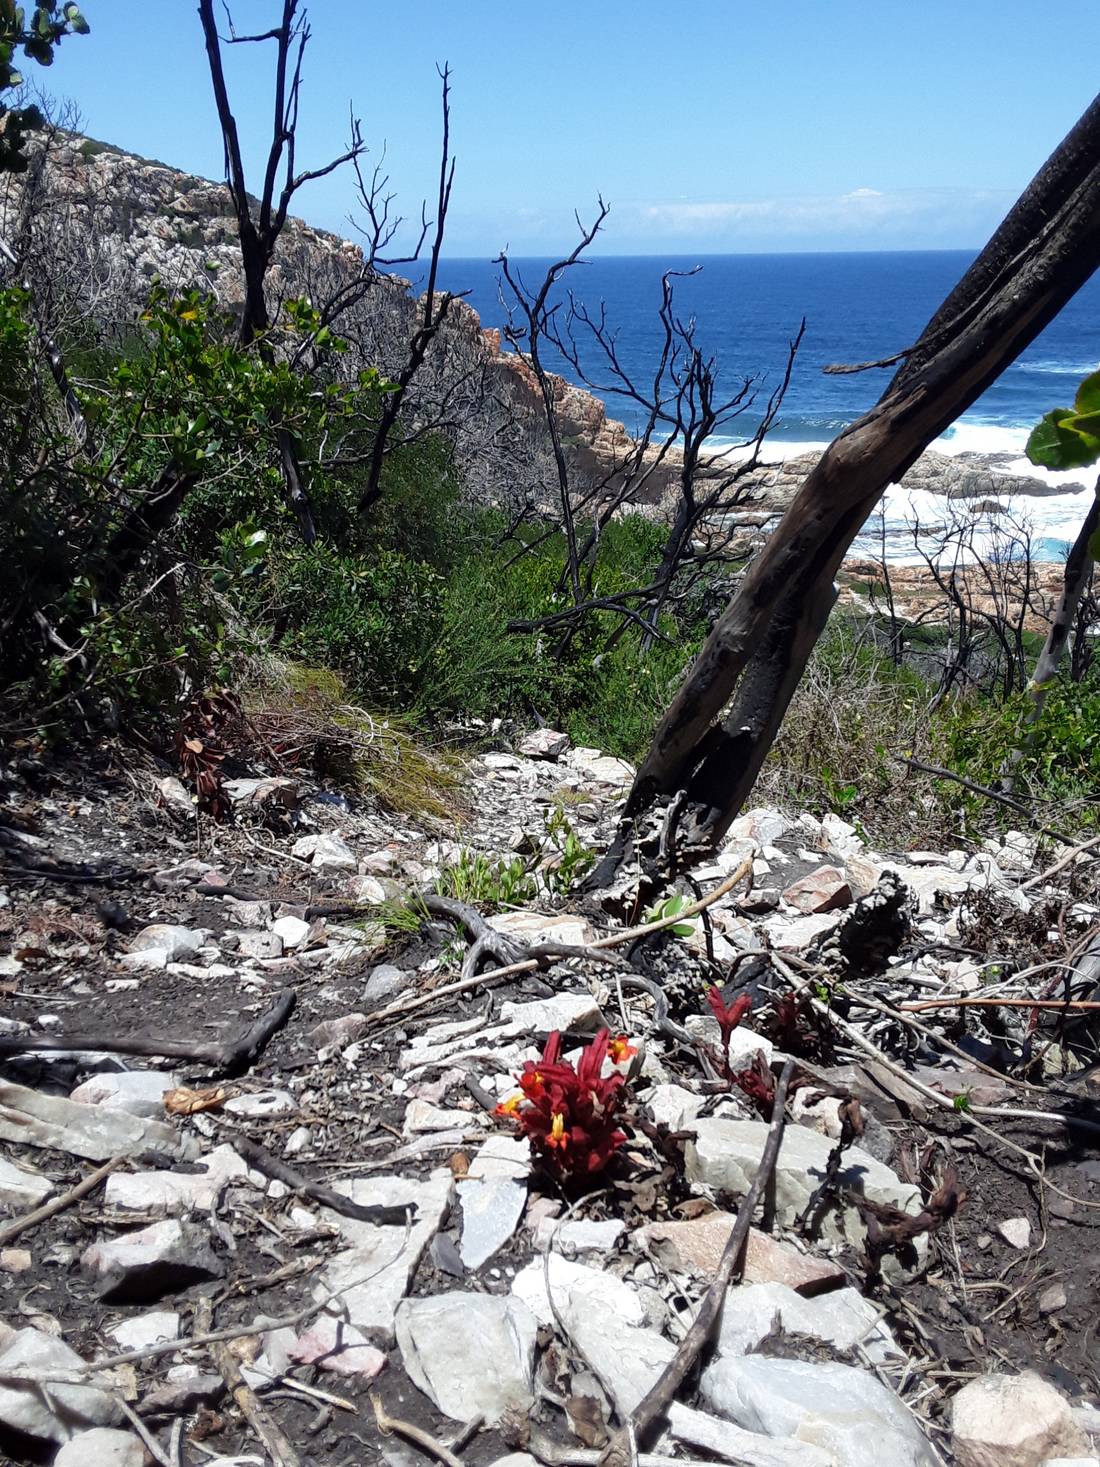 Another tenacious little local South African specimen sprouting up from the rock and ashes overlooking the Indian ocean